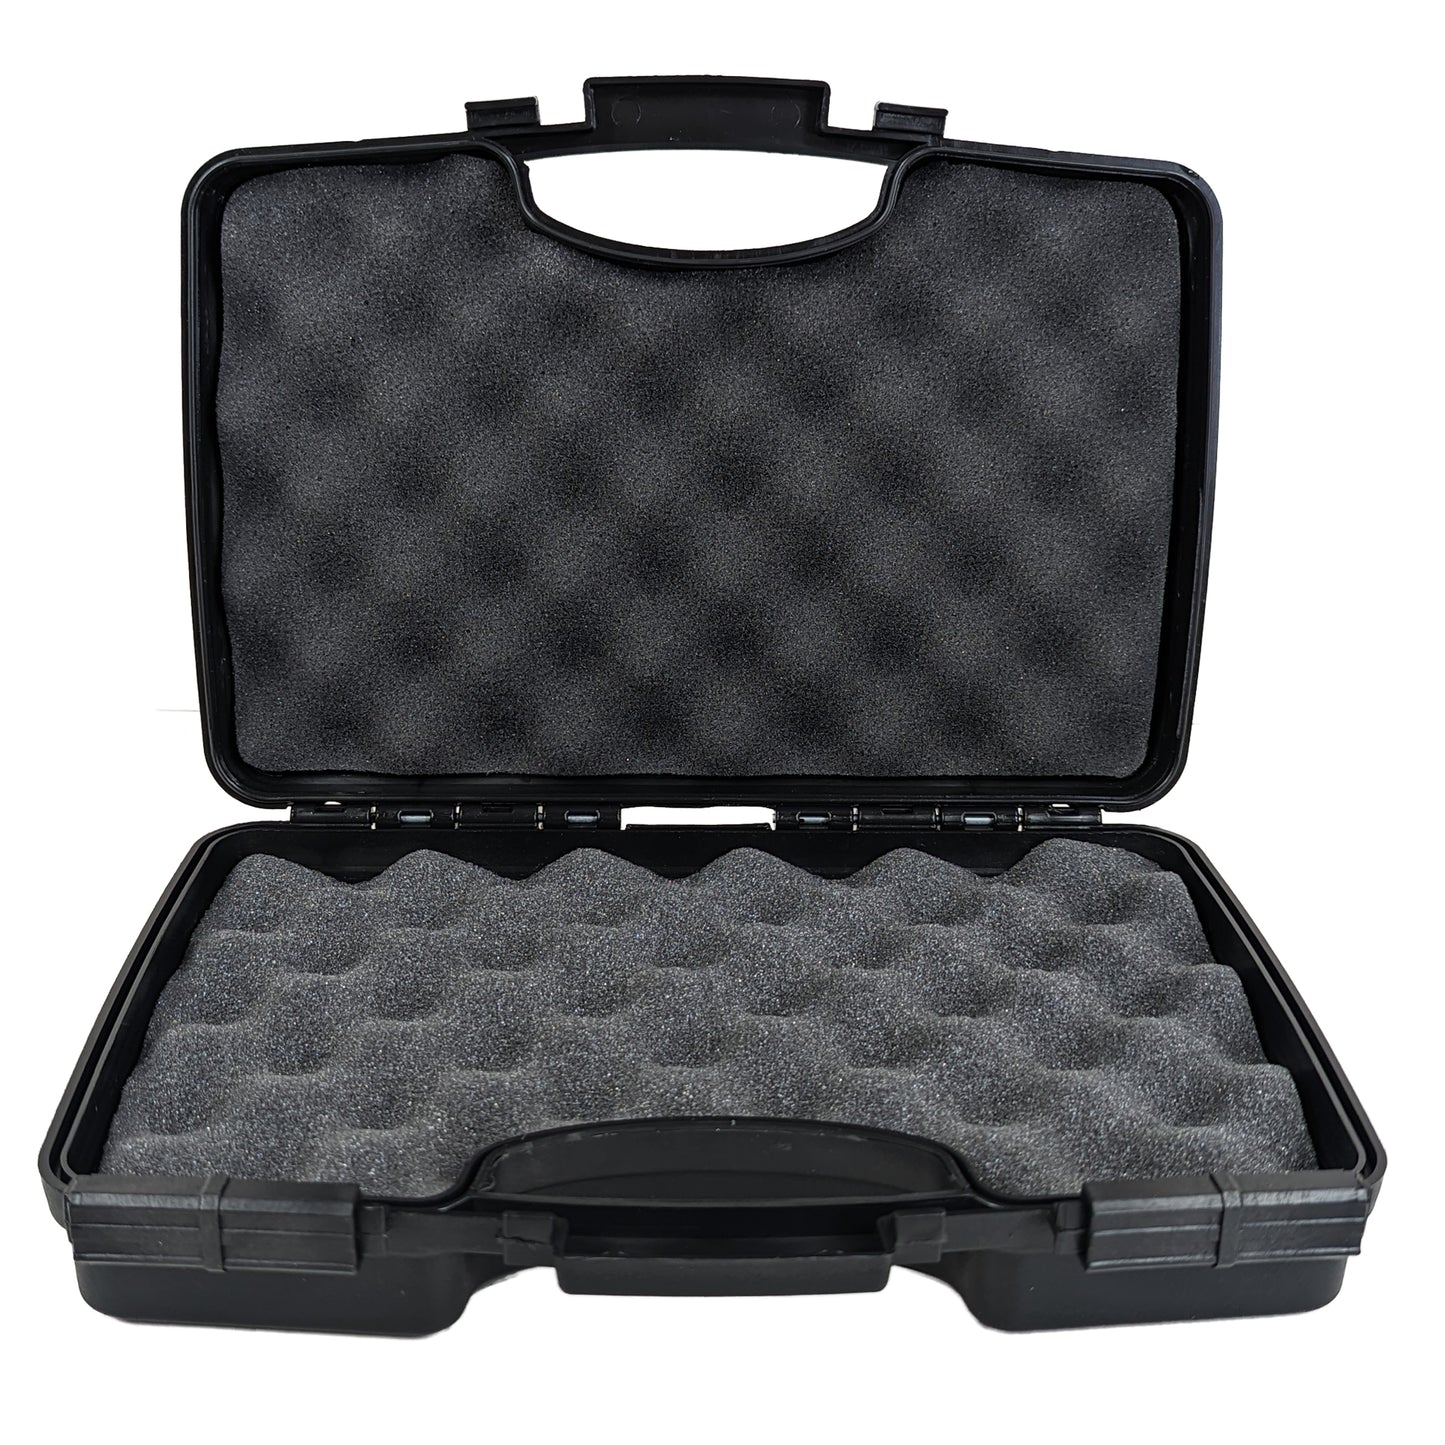 Emperor Arms Pistol Gun Case for Firearms, Handgun Hard Carrying Cases Lockable Storage for Home or Travel, Heavy-Duty with Egg Crate Foam